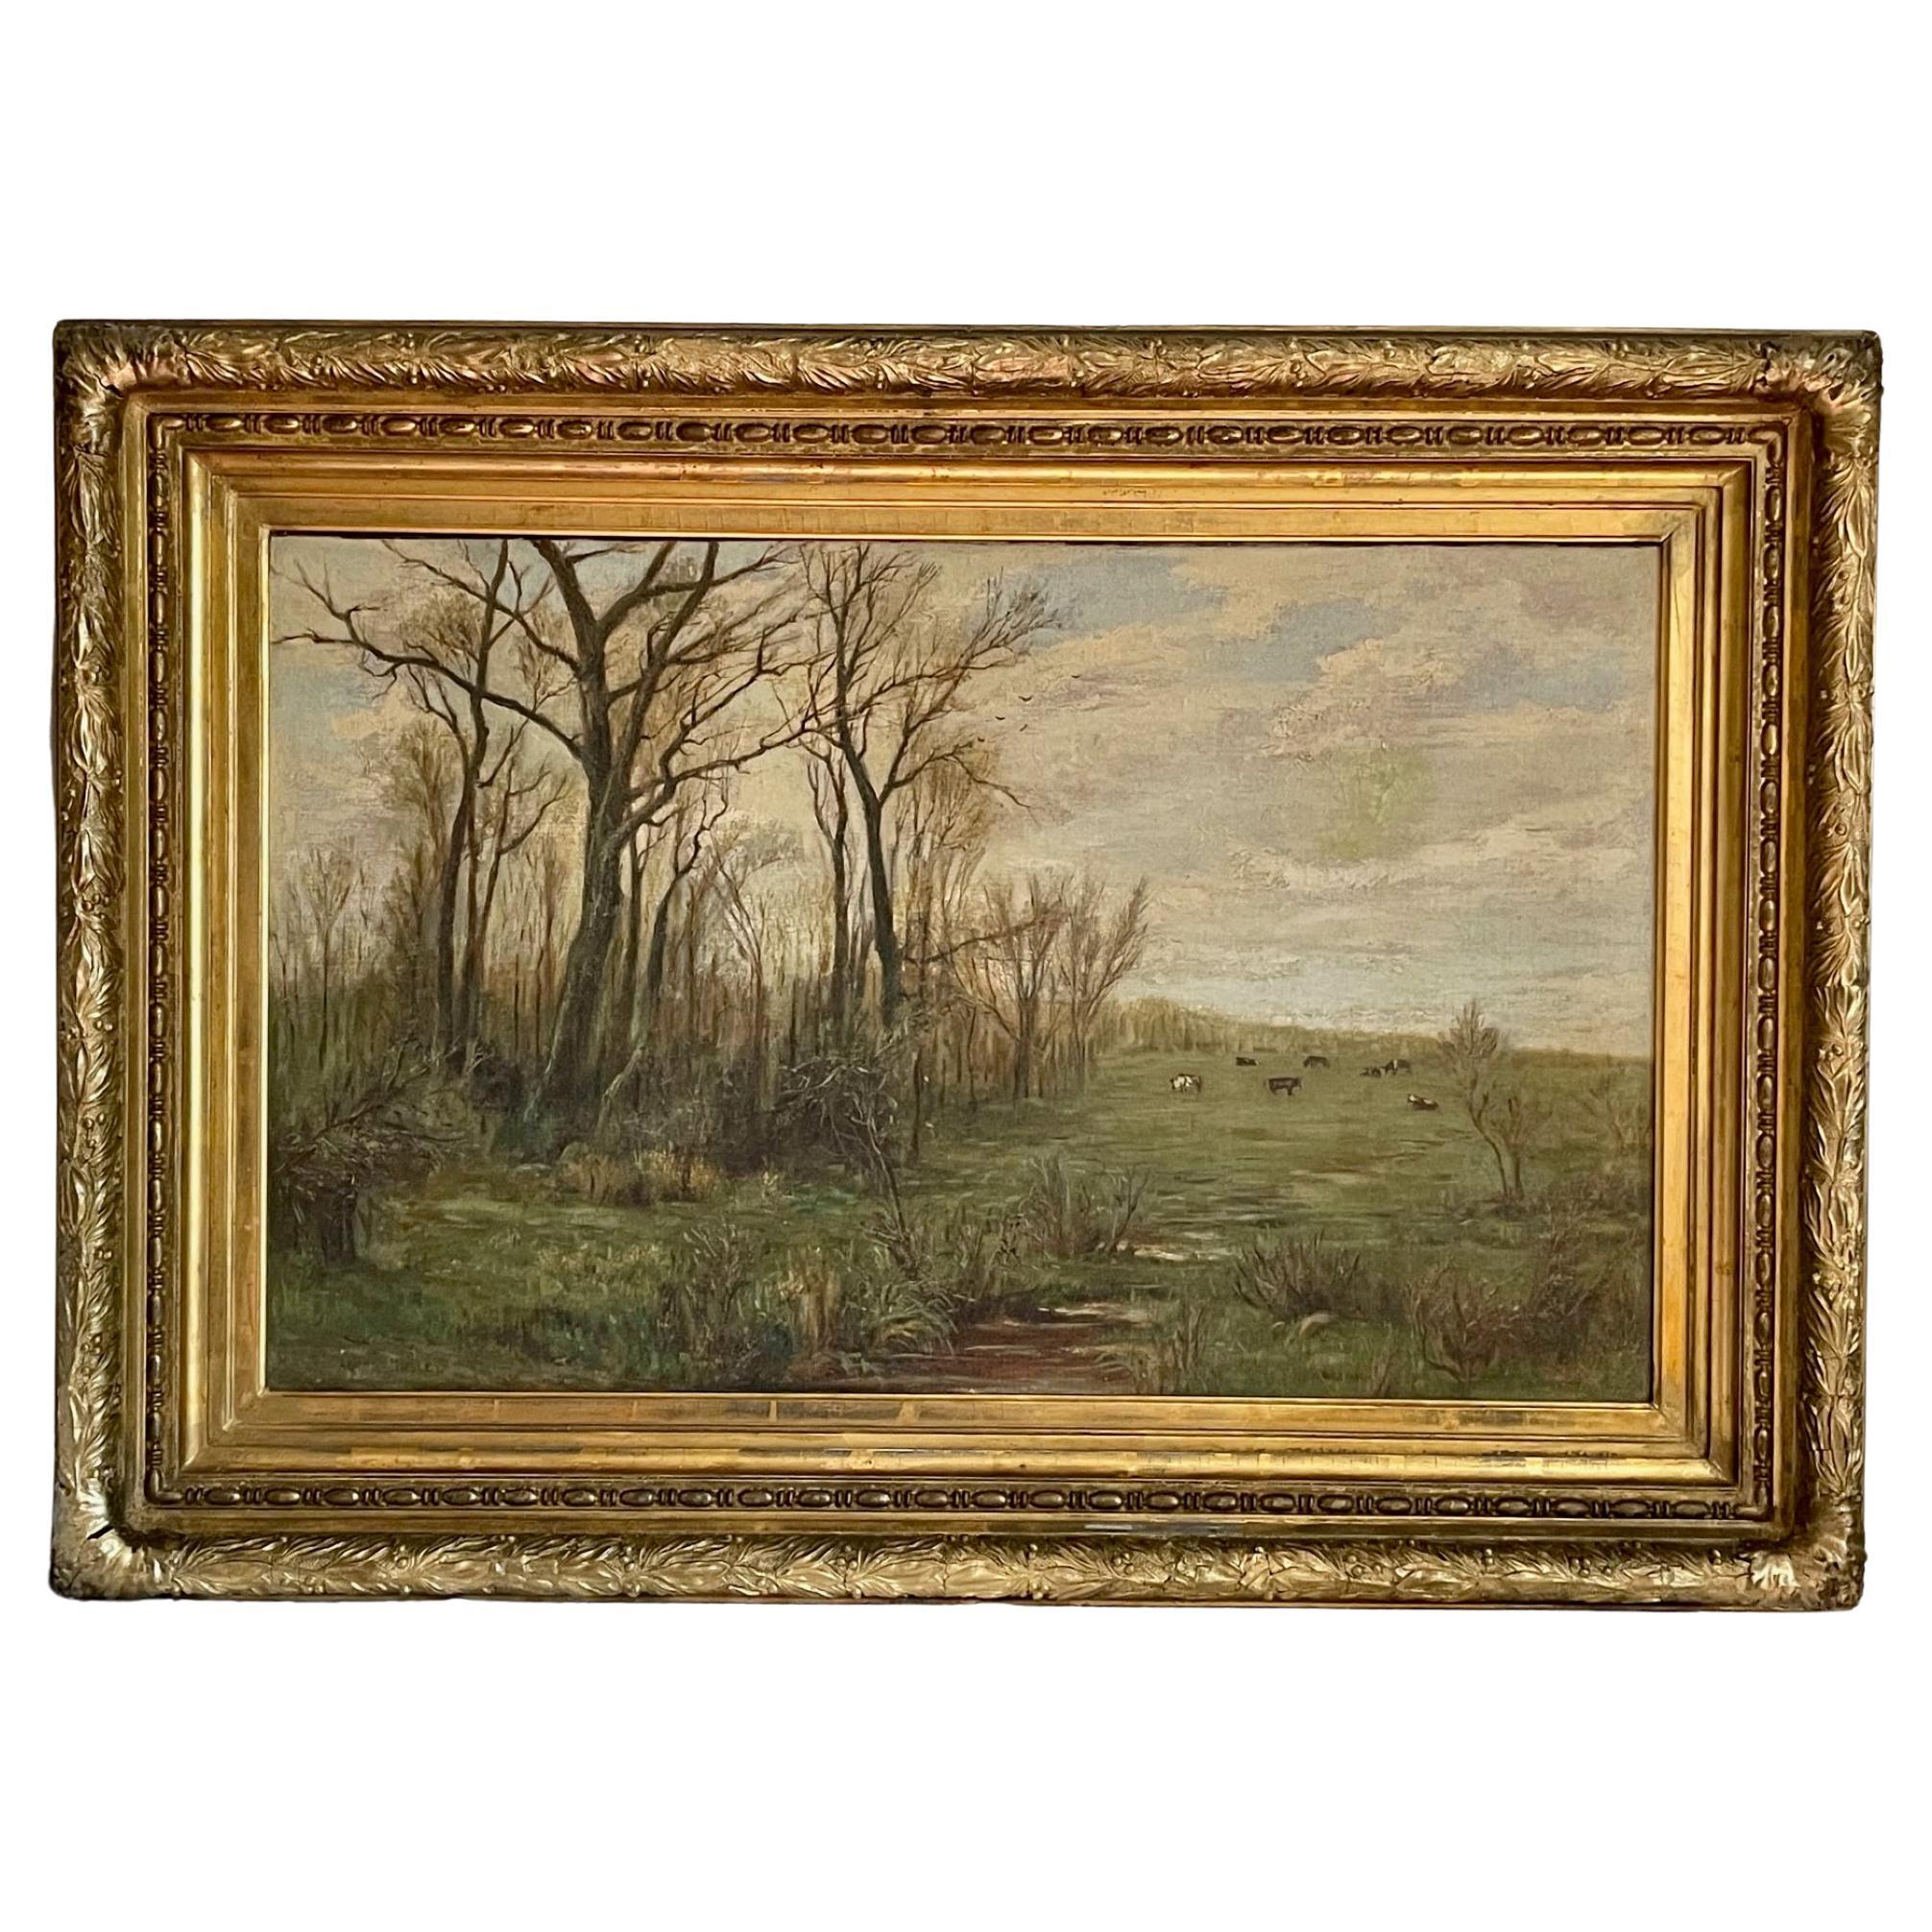 Large 19th Century Signed American Landscape Painting, Original Period Frame